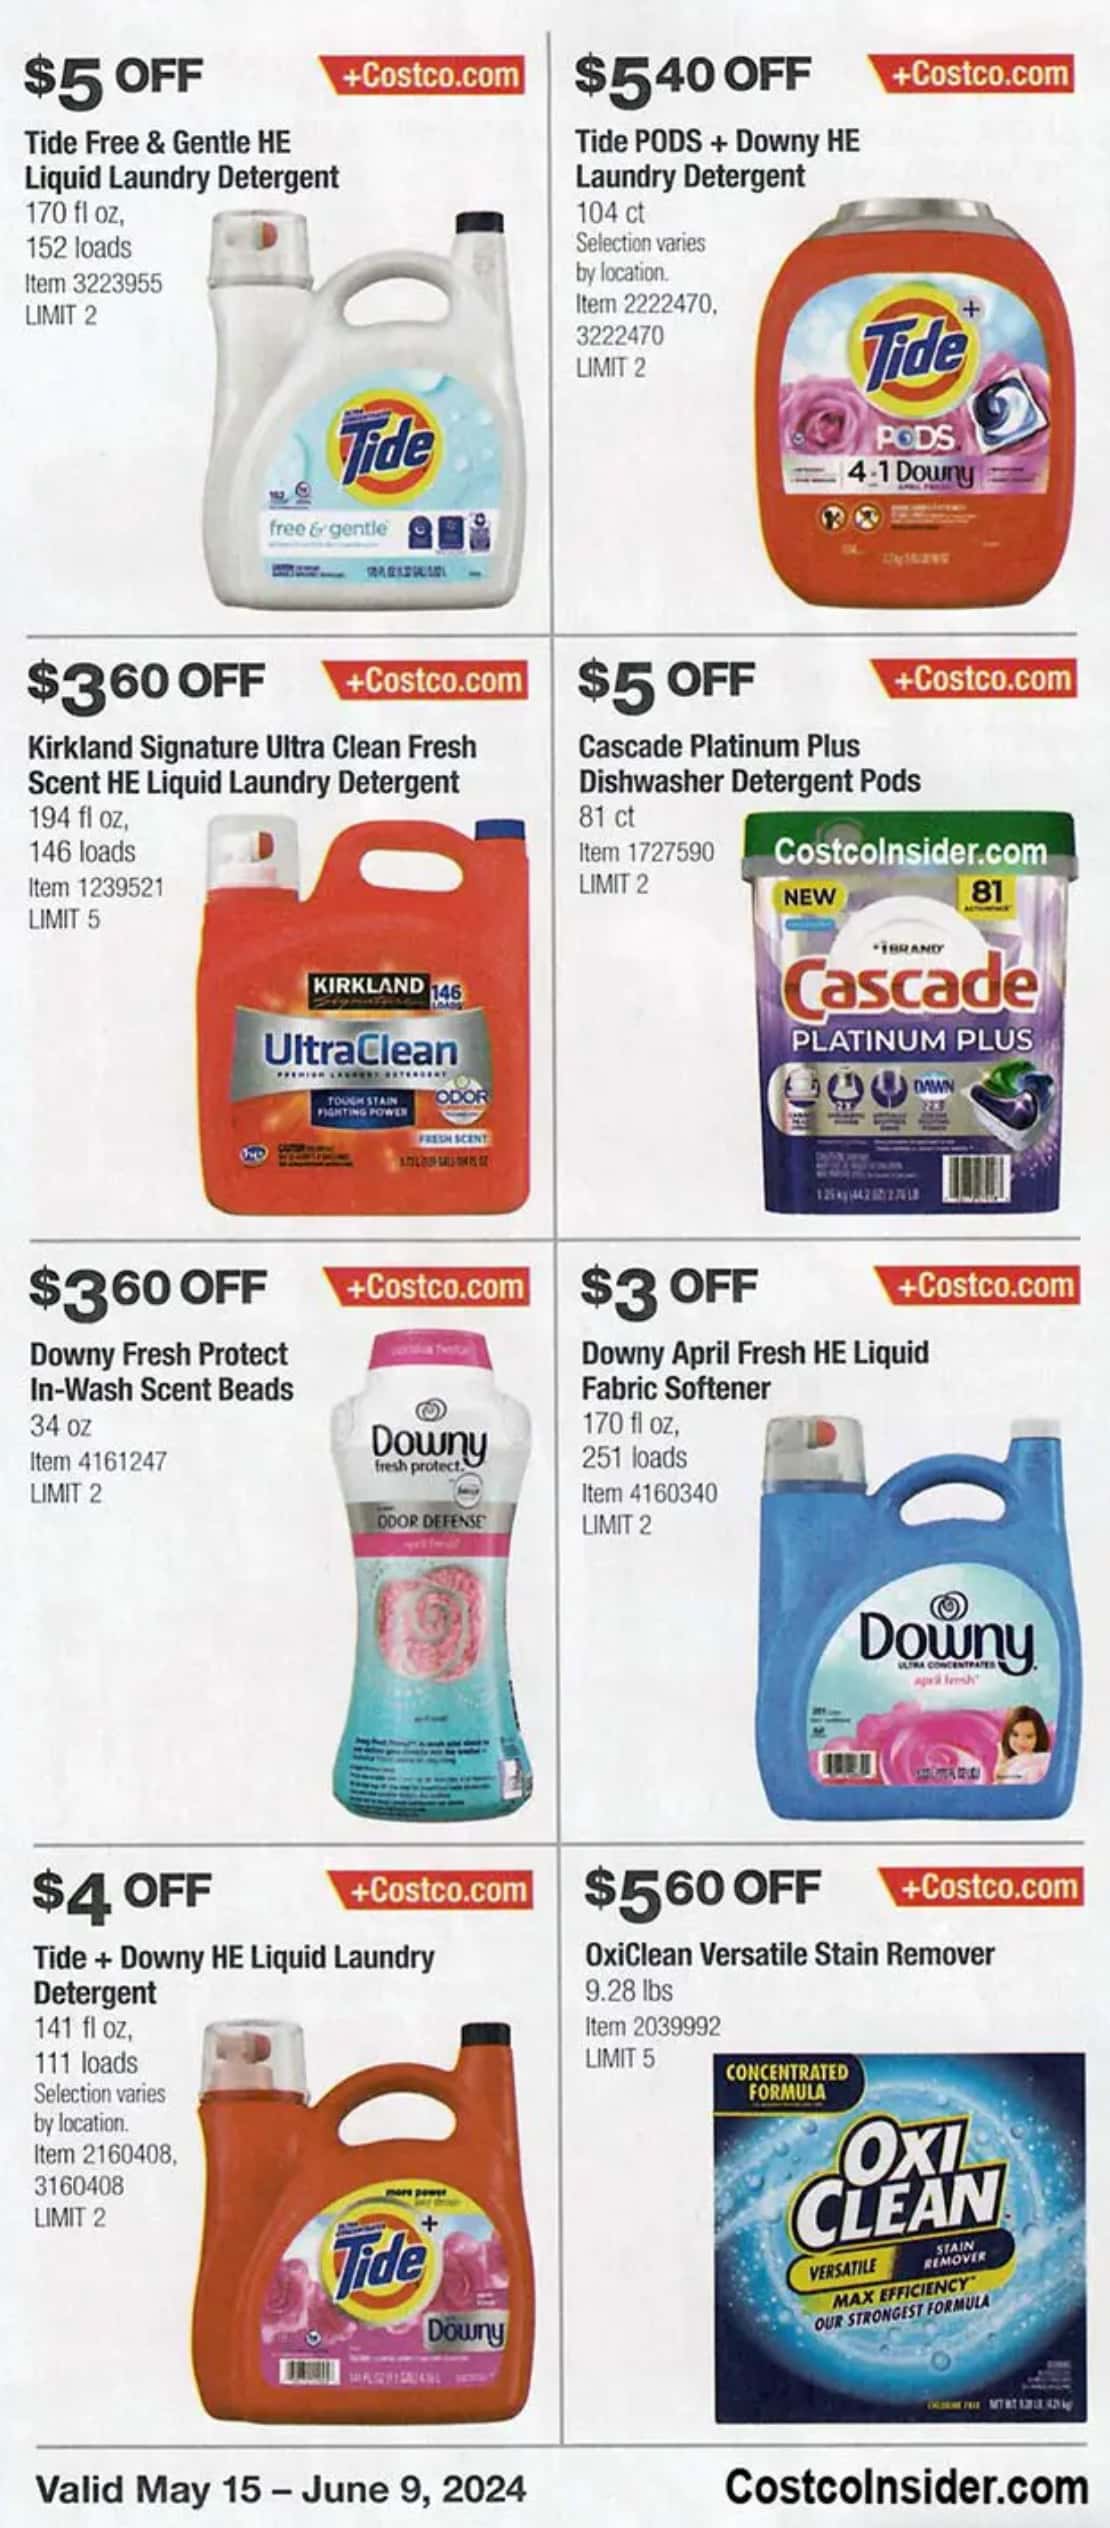 Costco July 2024 Weekly Sales, Deals, Discounts and Digital Coupons.